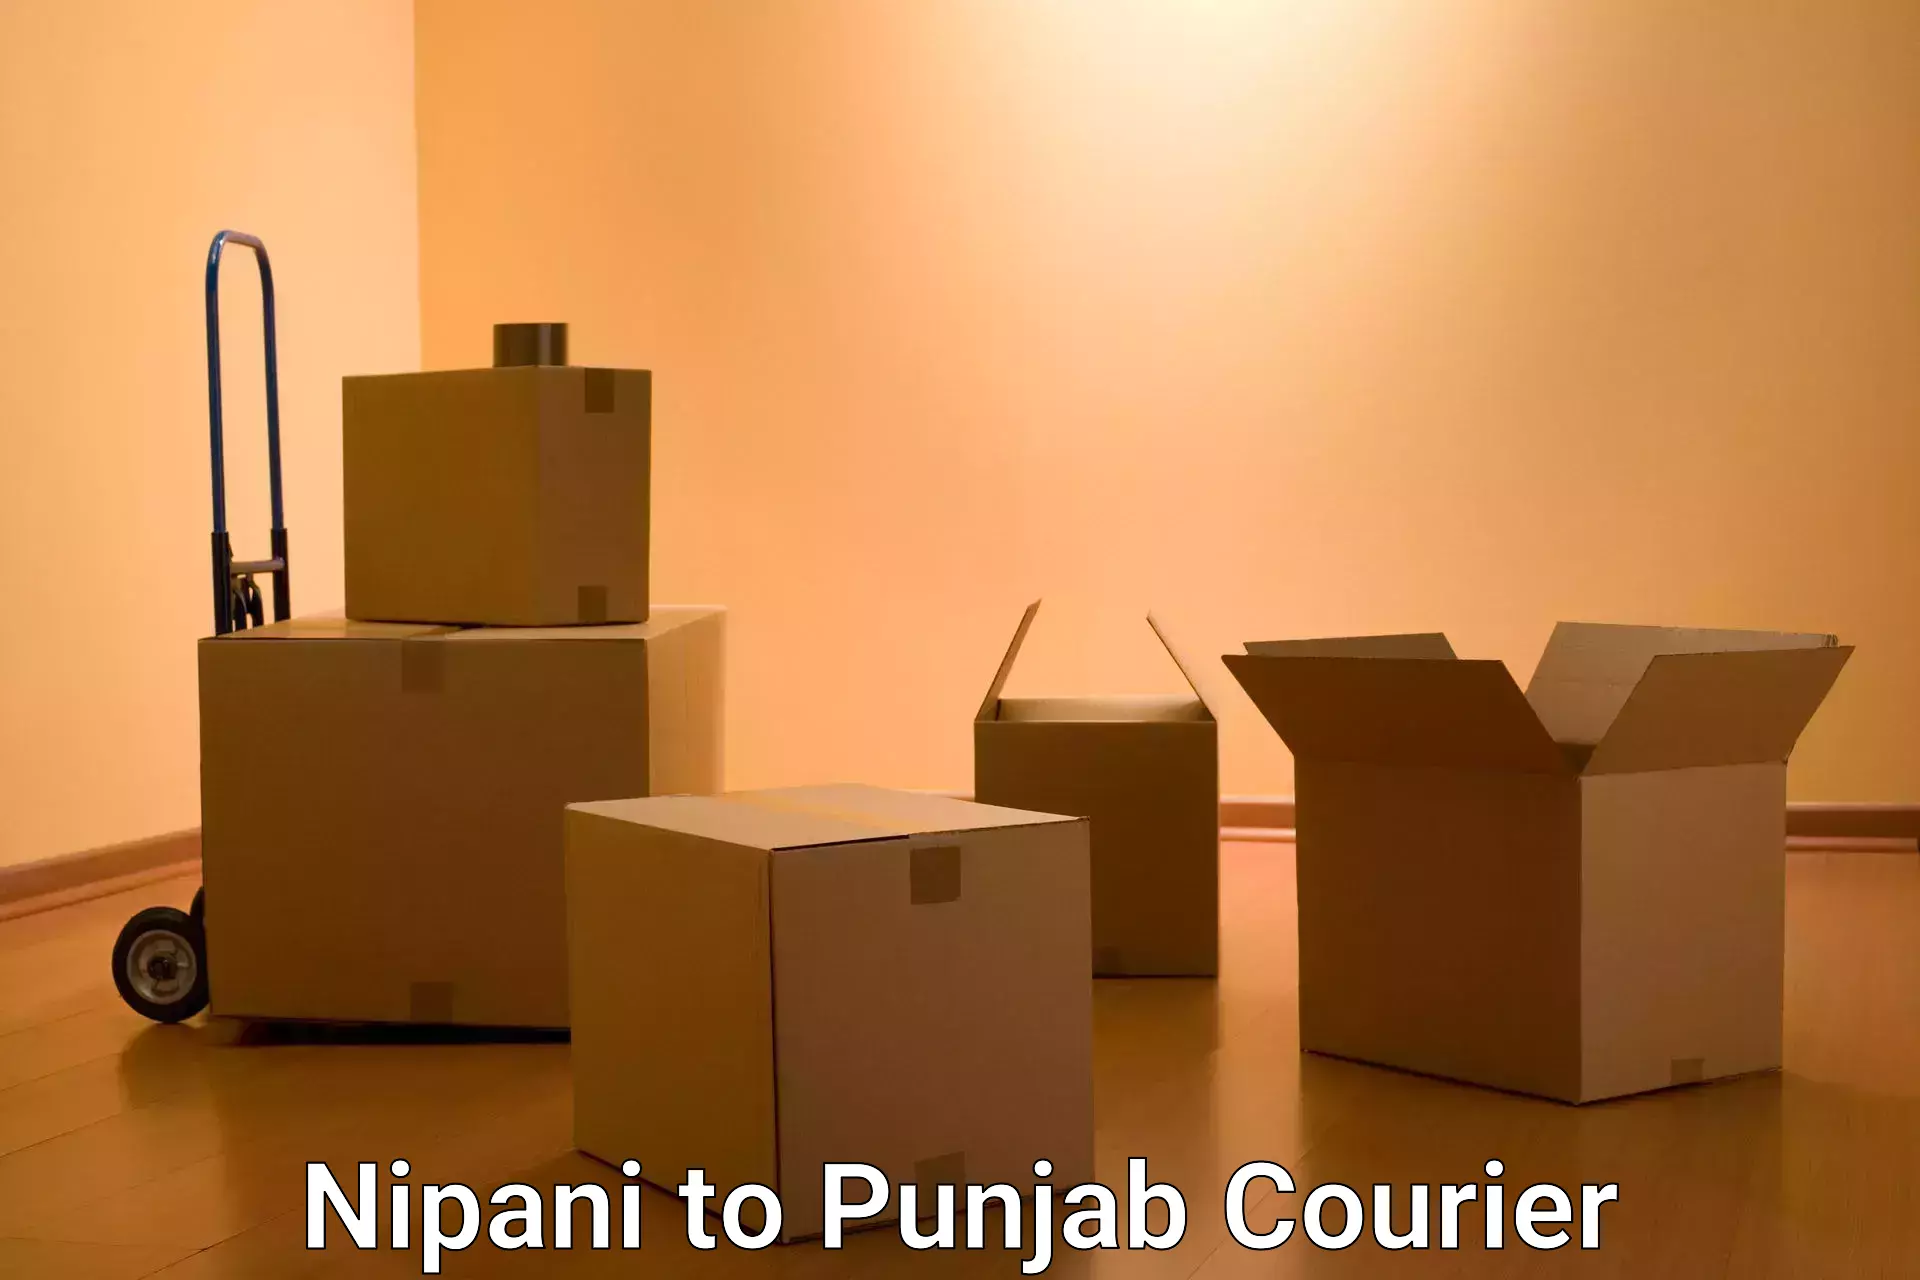 Medical delivery services Nipani to Punjab